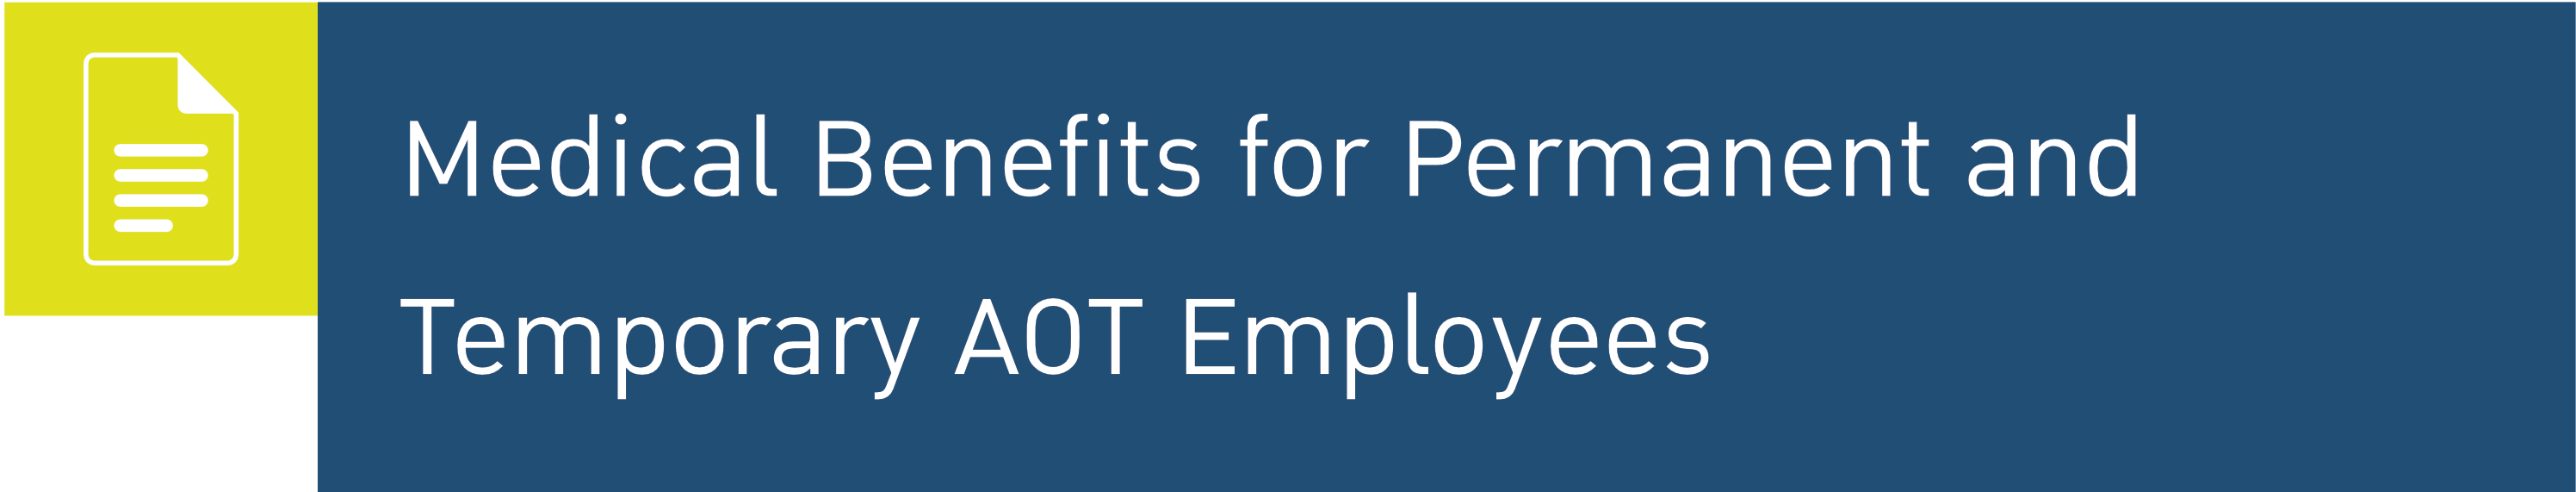 Medical Benefits for Permanenr and Temporary AOT Employees